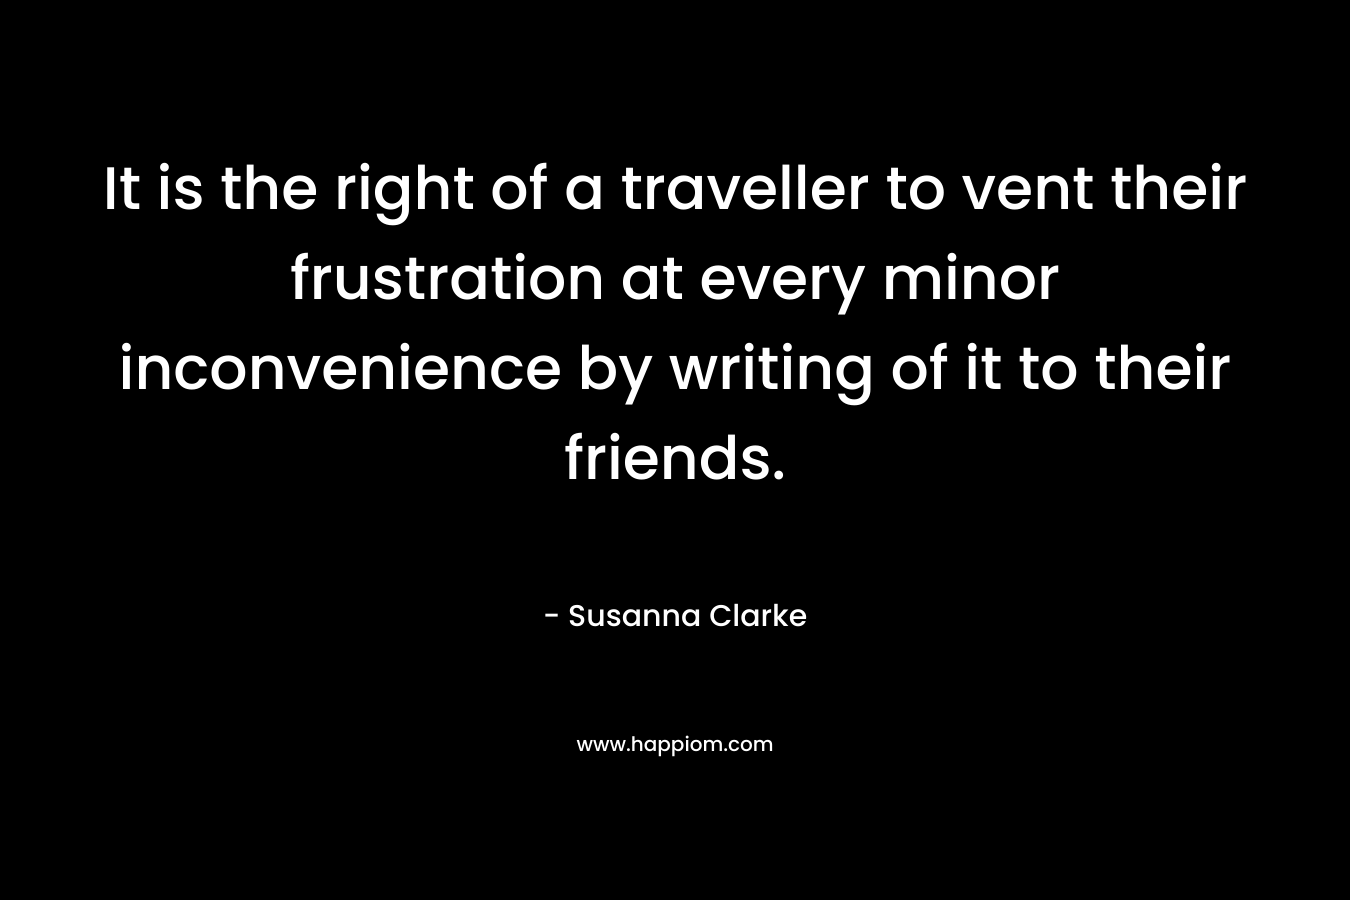 It is the right of a traveller to vent their frustration at every minor inconvenience by writing of it to their friends. – Susanna Clarke